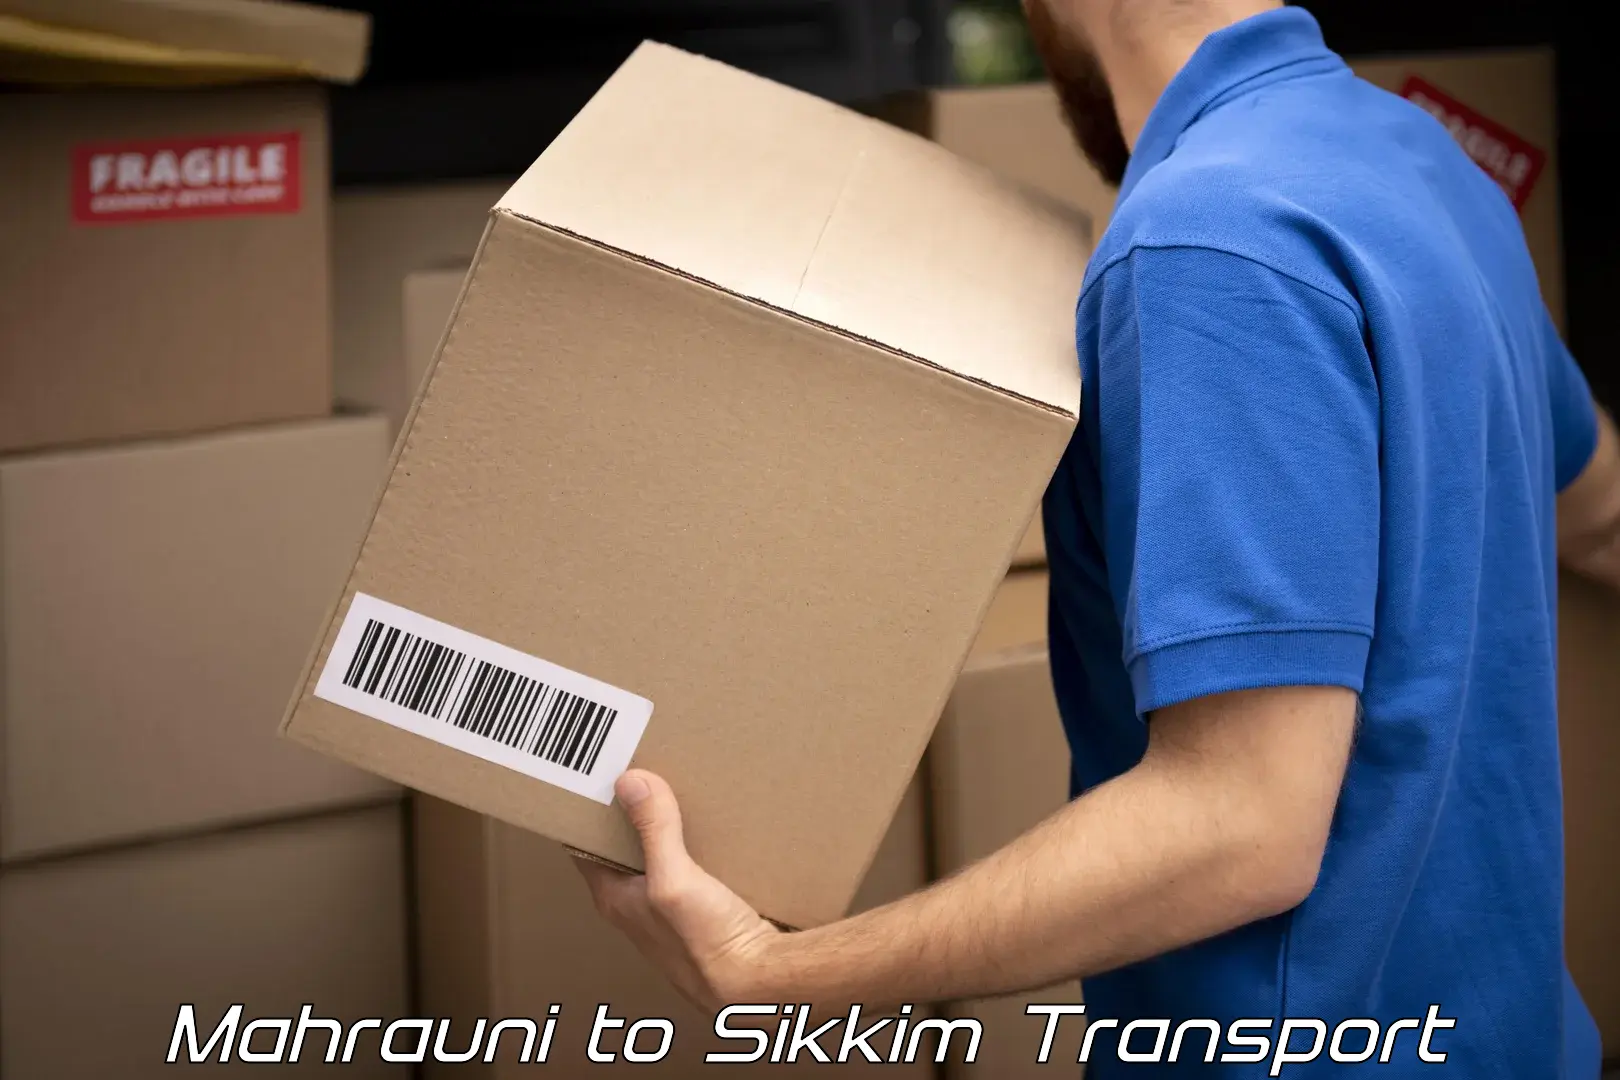 Container transport service Mahrauni to East Sikkim